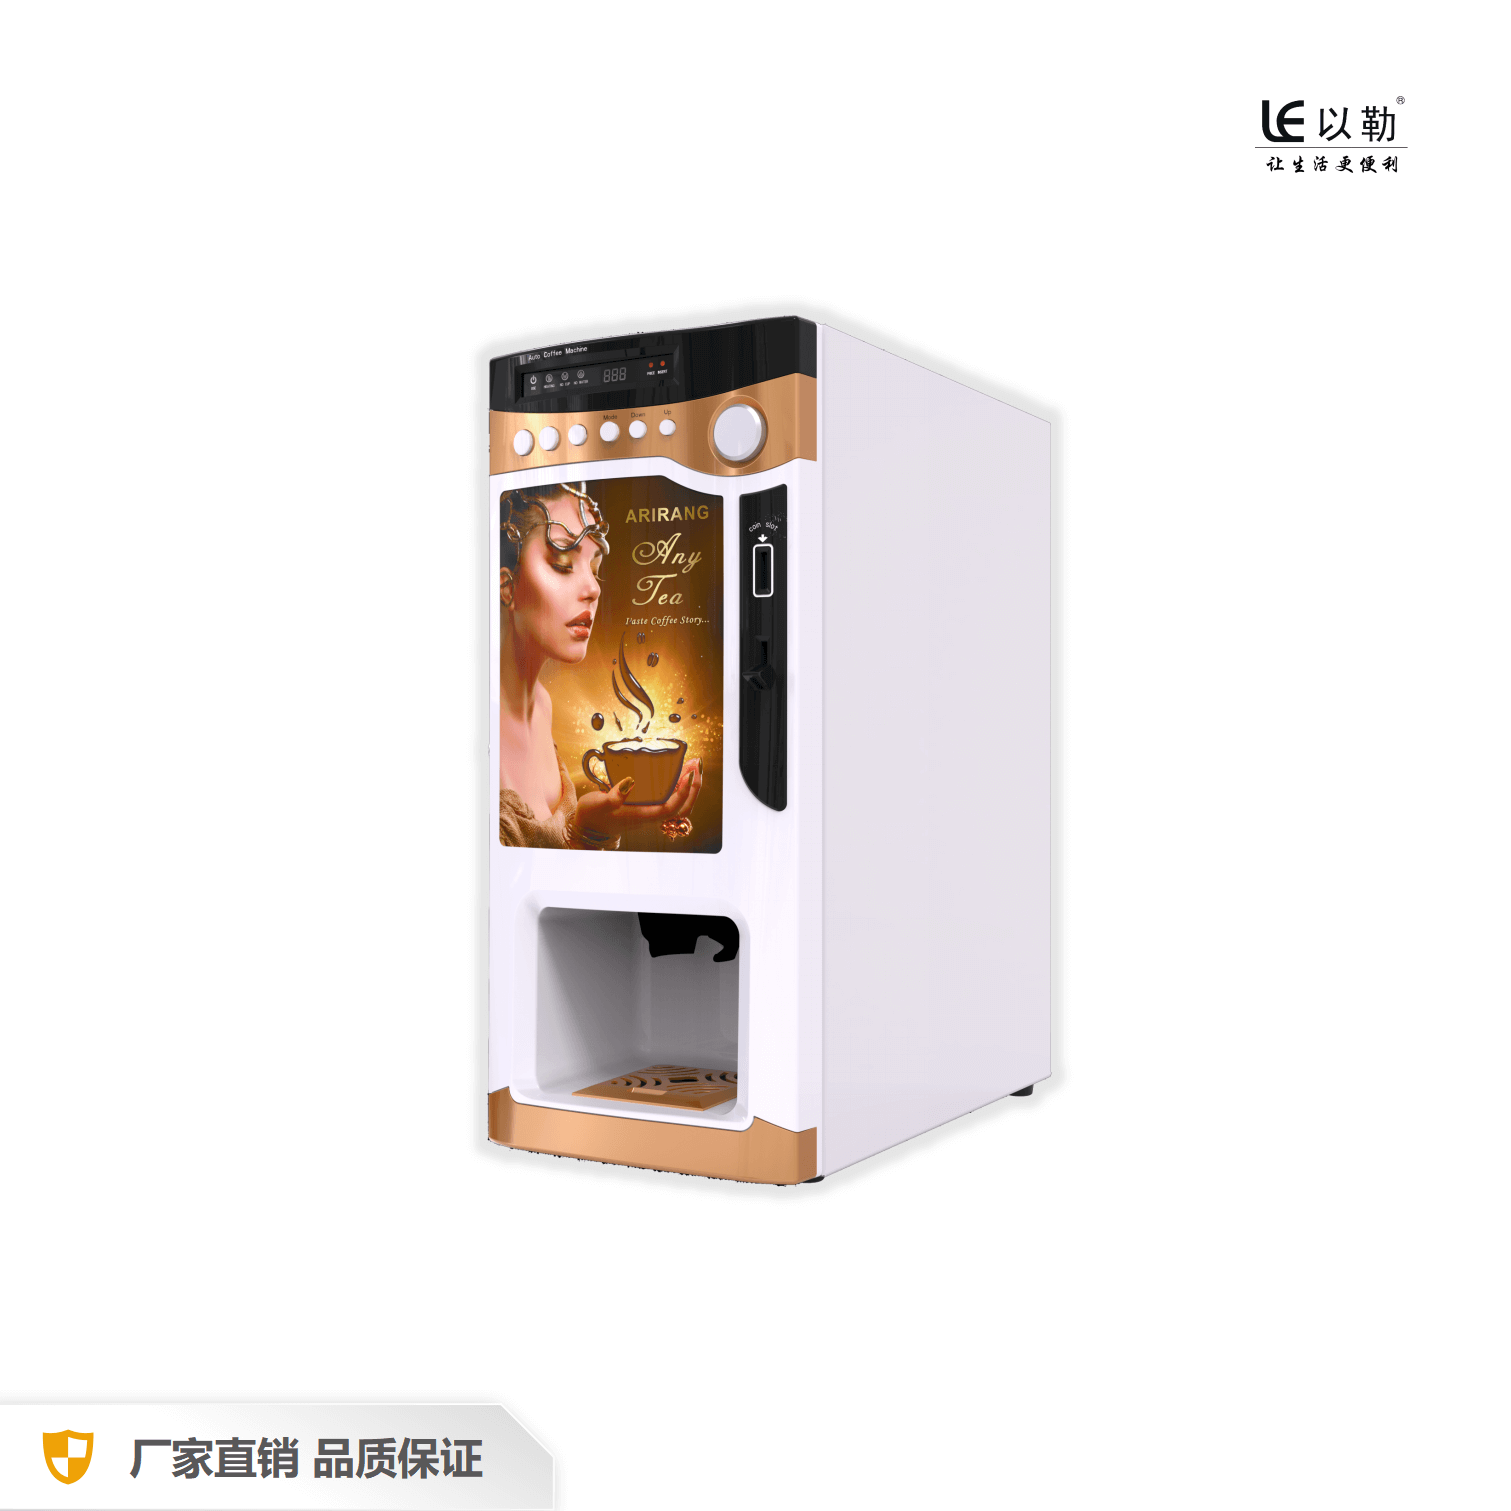 Tabletop Espresso Coffee Vending Machine With Cup Dispenser 